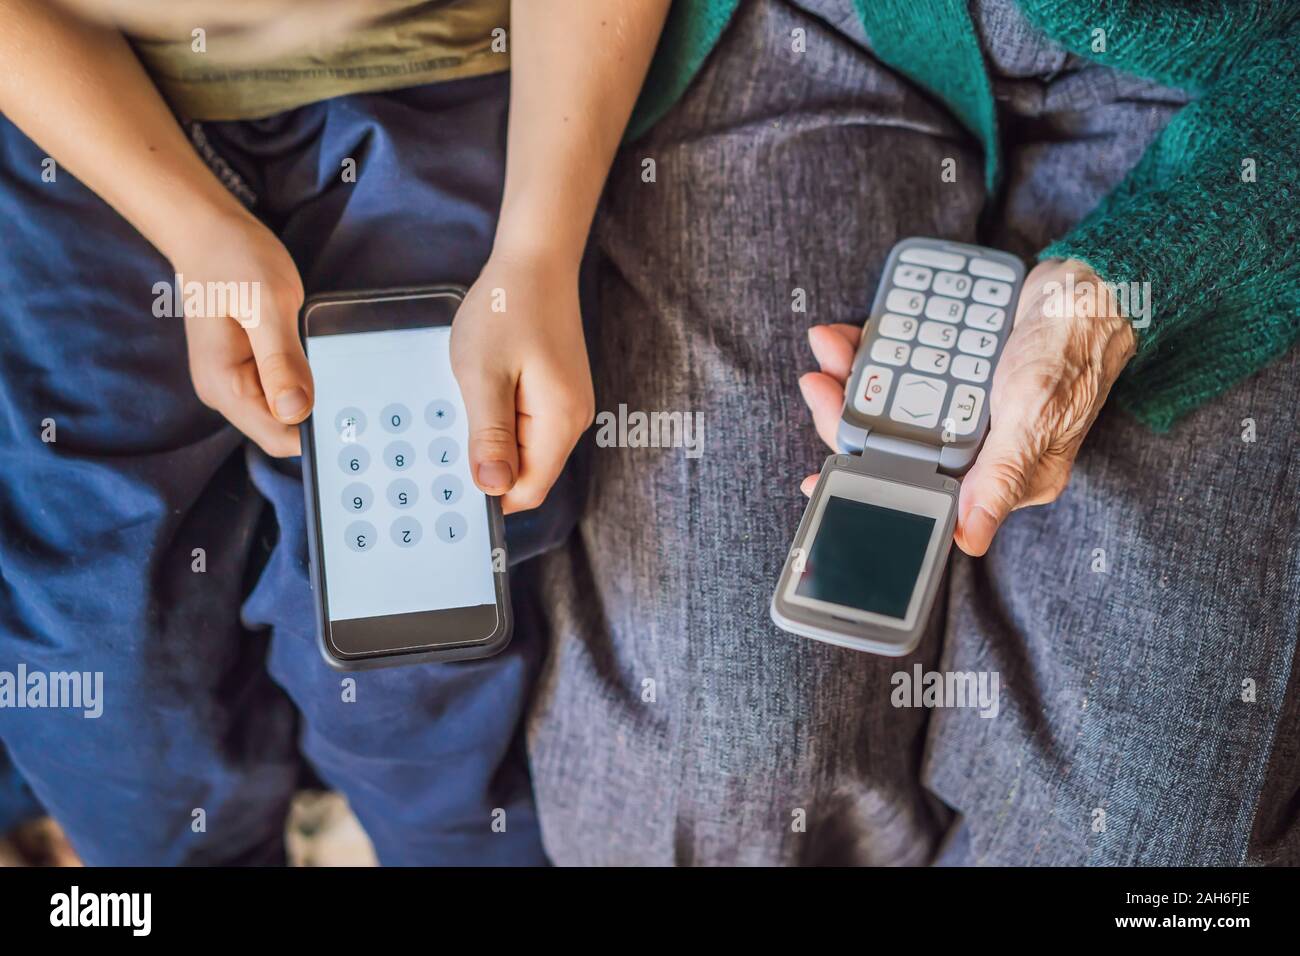 Old woman uses an old phone, boy uses a smartphone Stock Photo